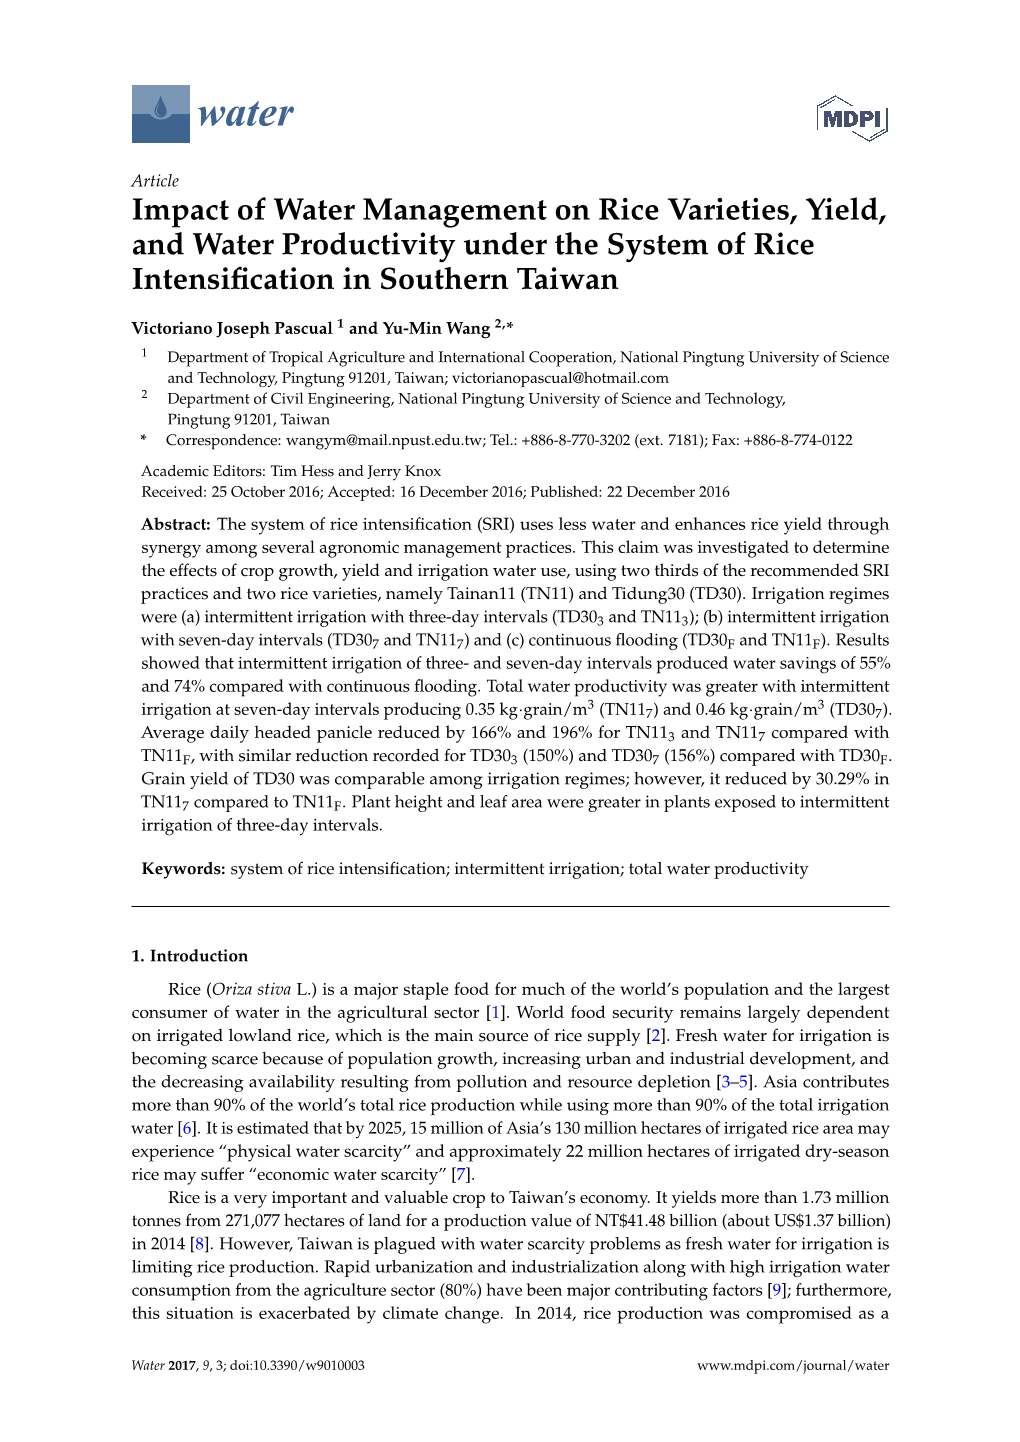 Impact of Water Management on Rice Varieties, Yield, and Water Productivity Under the System of Rice Intensiﬁcation in Southern Taiwan